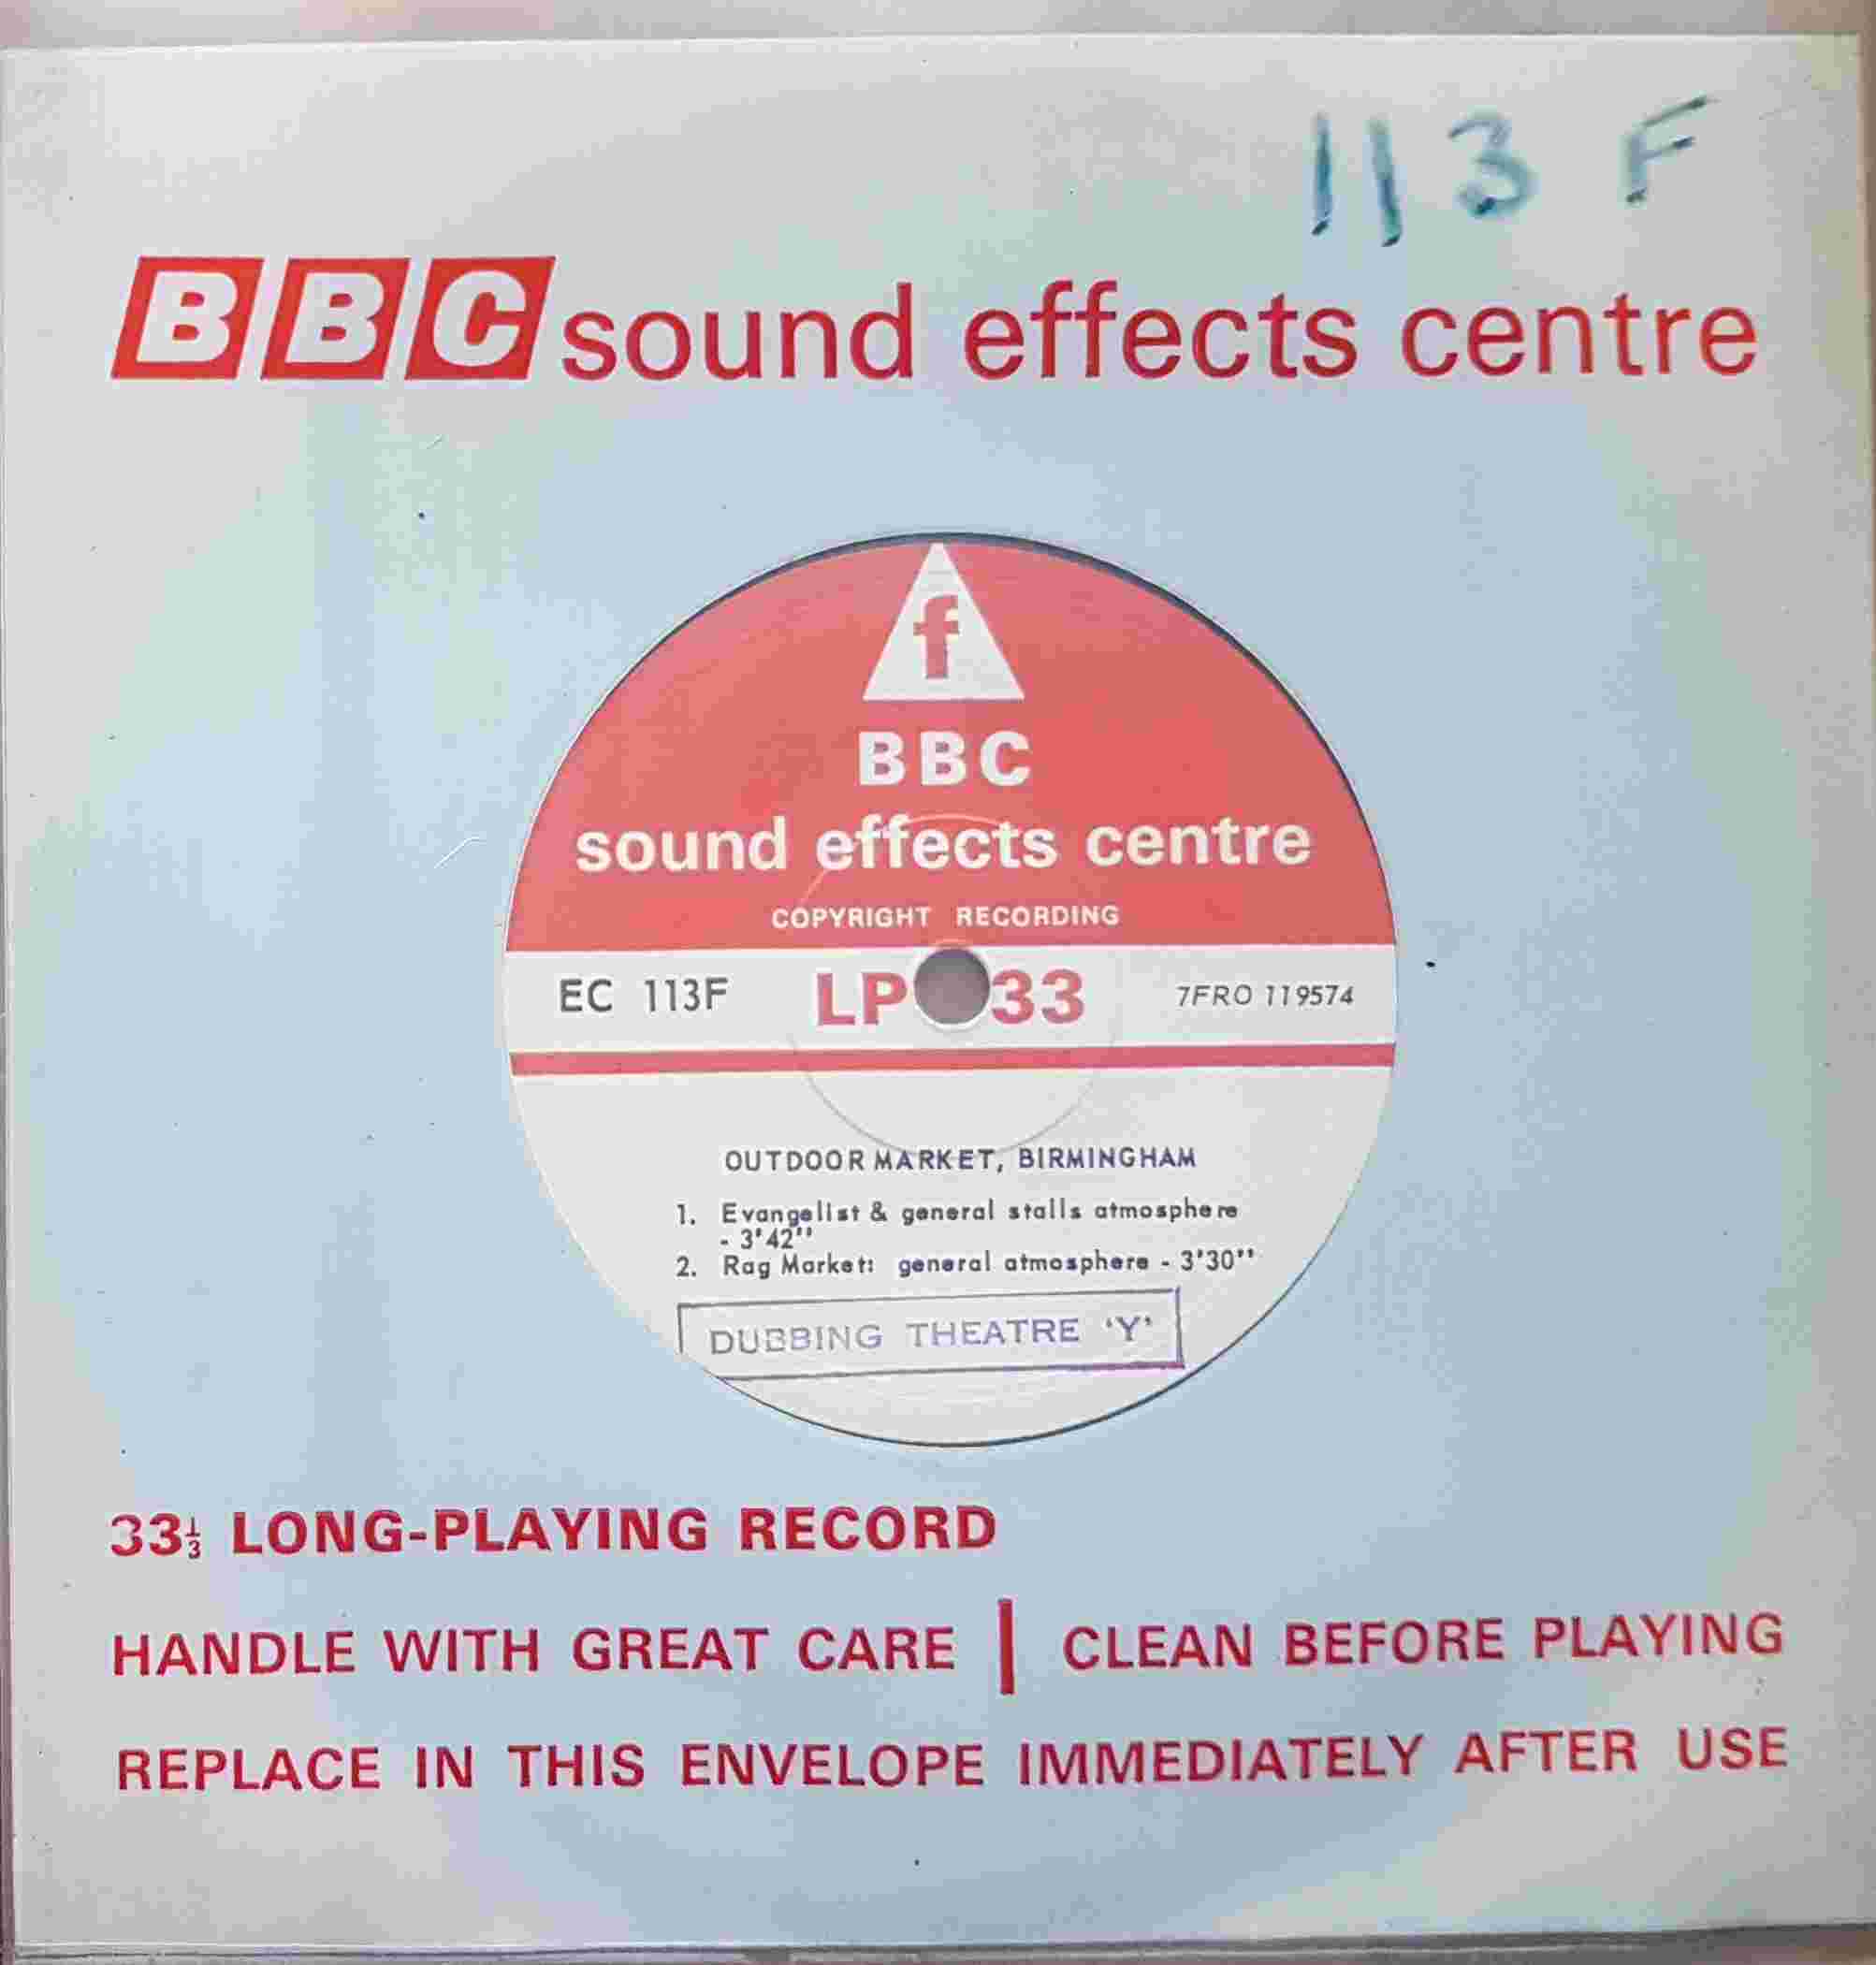 Picture of EC 113F Birmingham shopping centre and market by artist Not registered from the BBC singles - Records and Tapes library